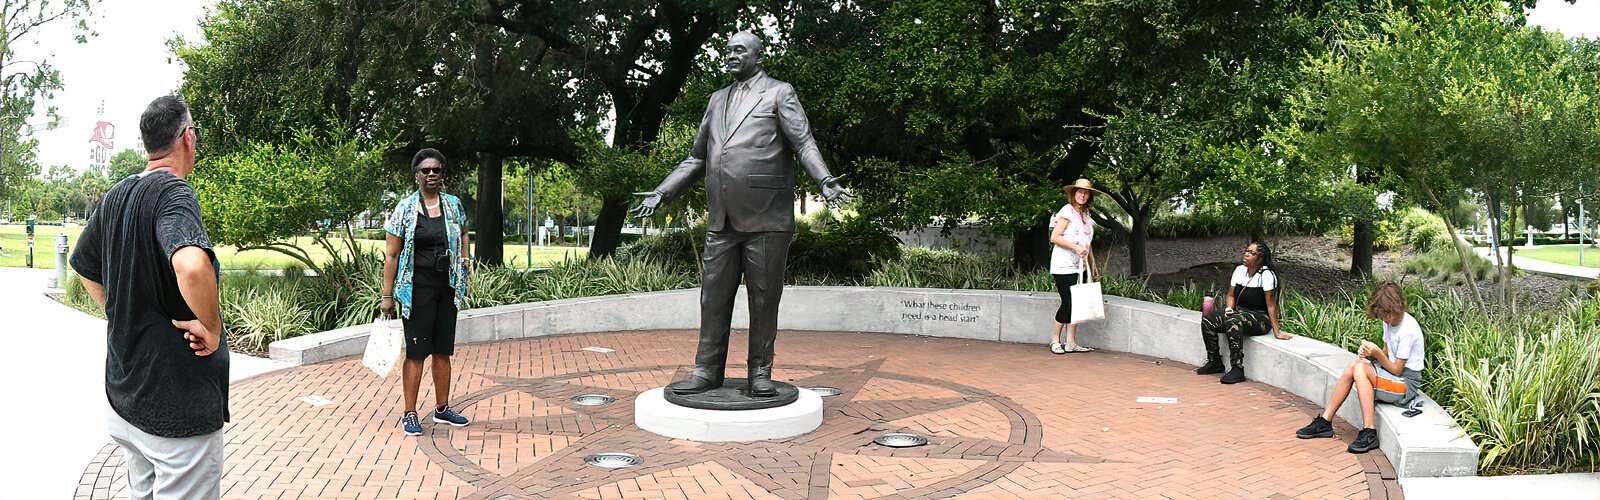 Perry Harvey, Sr. was a leader by example and an important force in Tampa’s civil rights struggle. His statue by Joel Randell welcomes visitors with open arms.